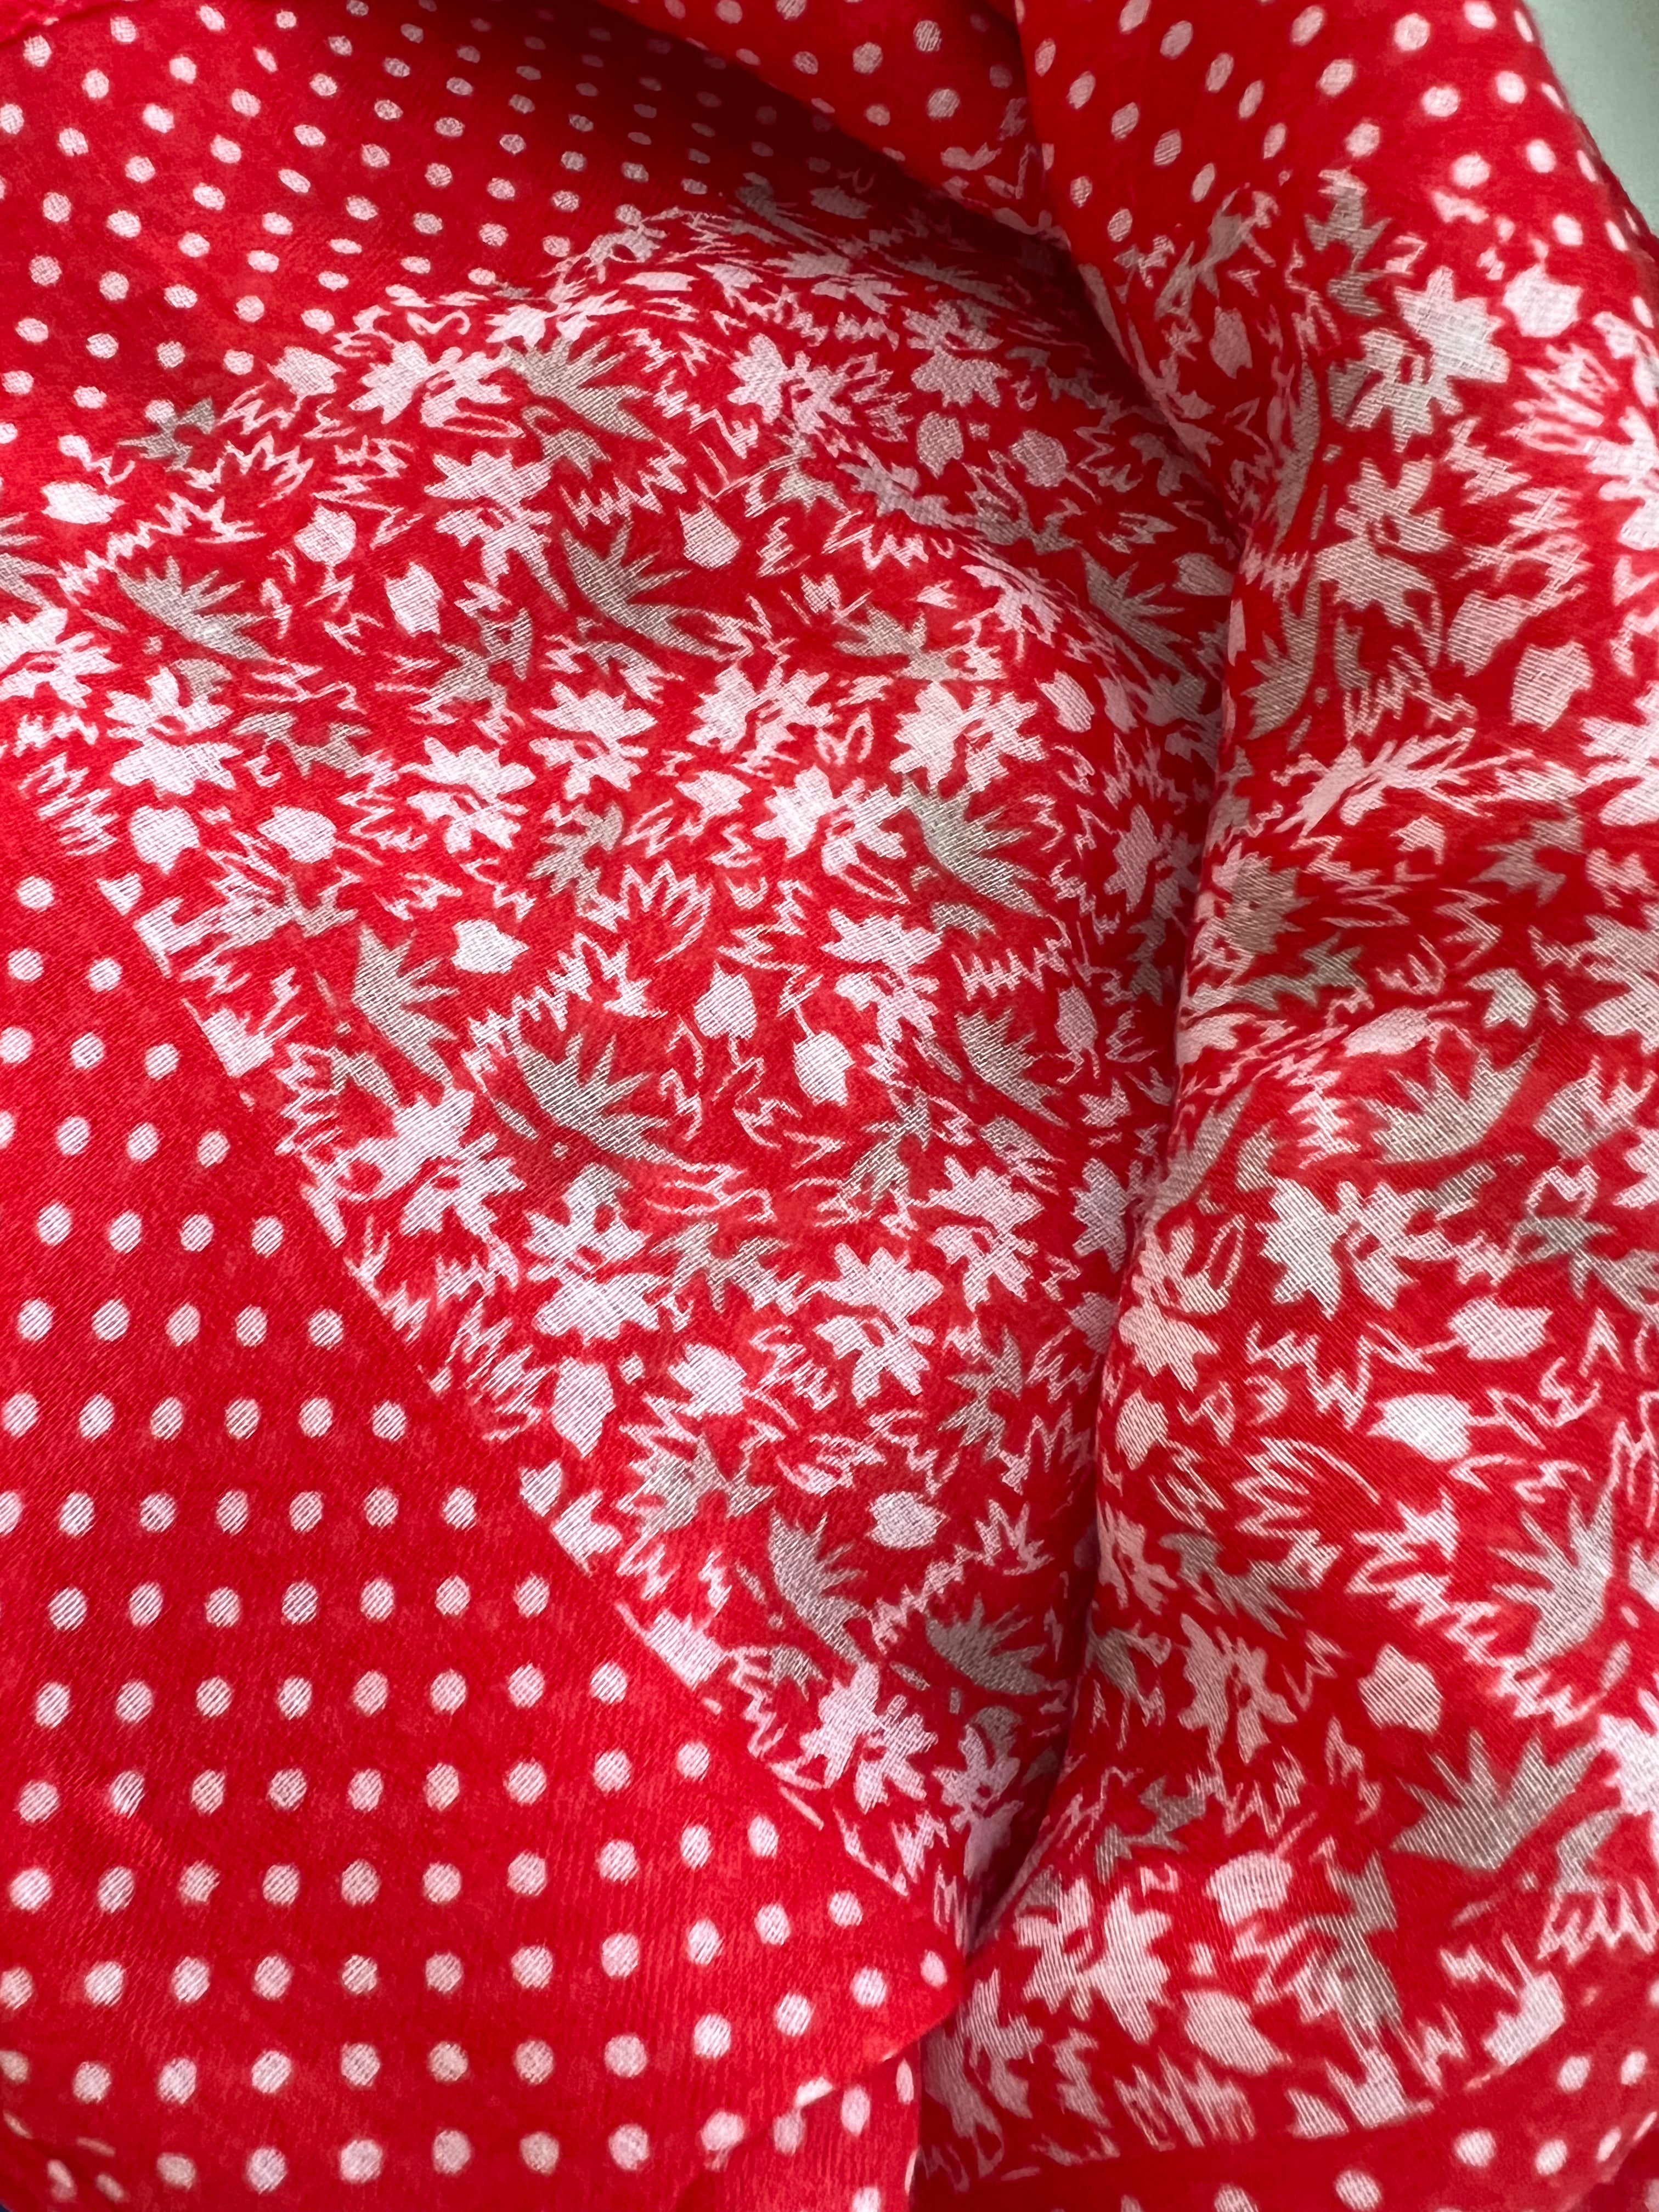 Dot & Floral Print Scarf in Red & Ivory